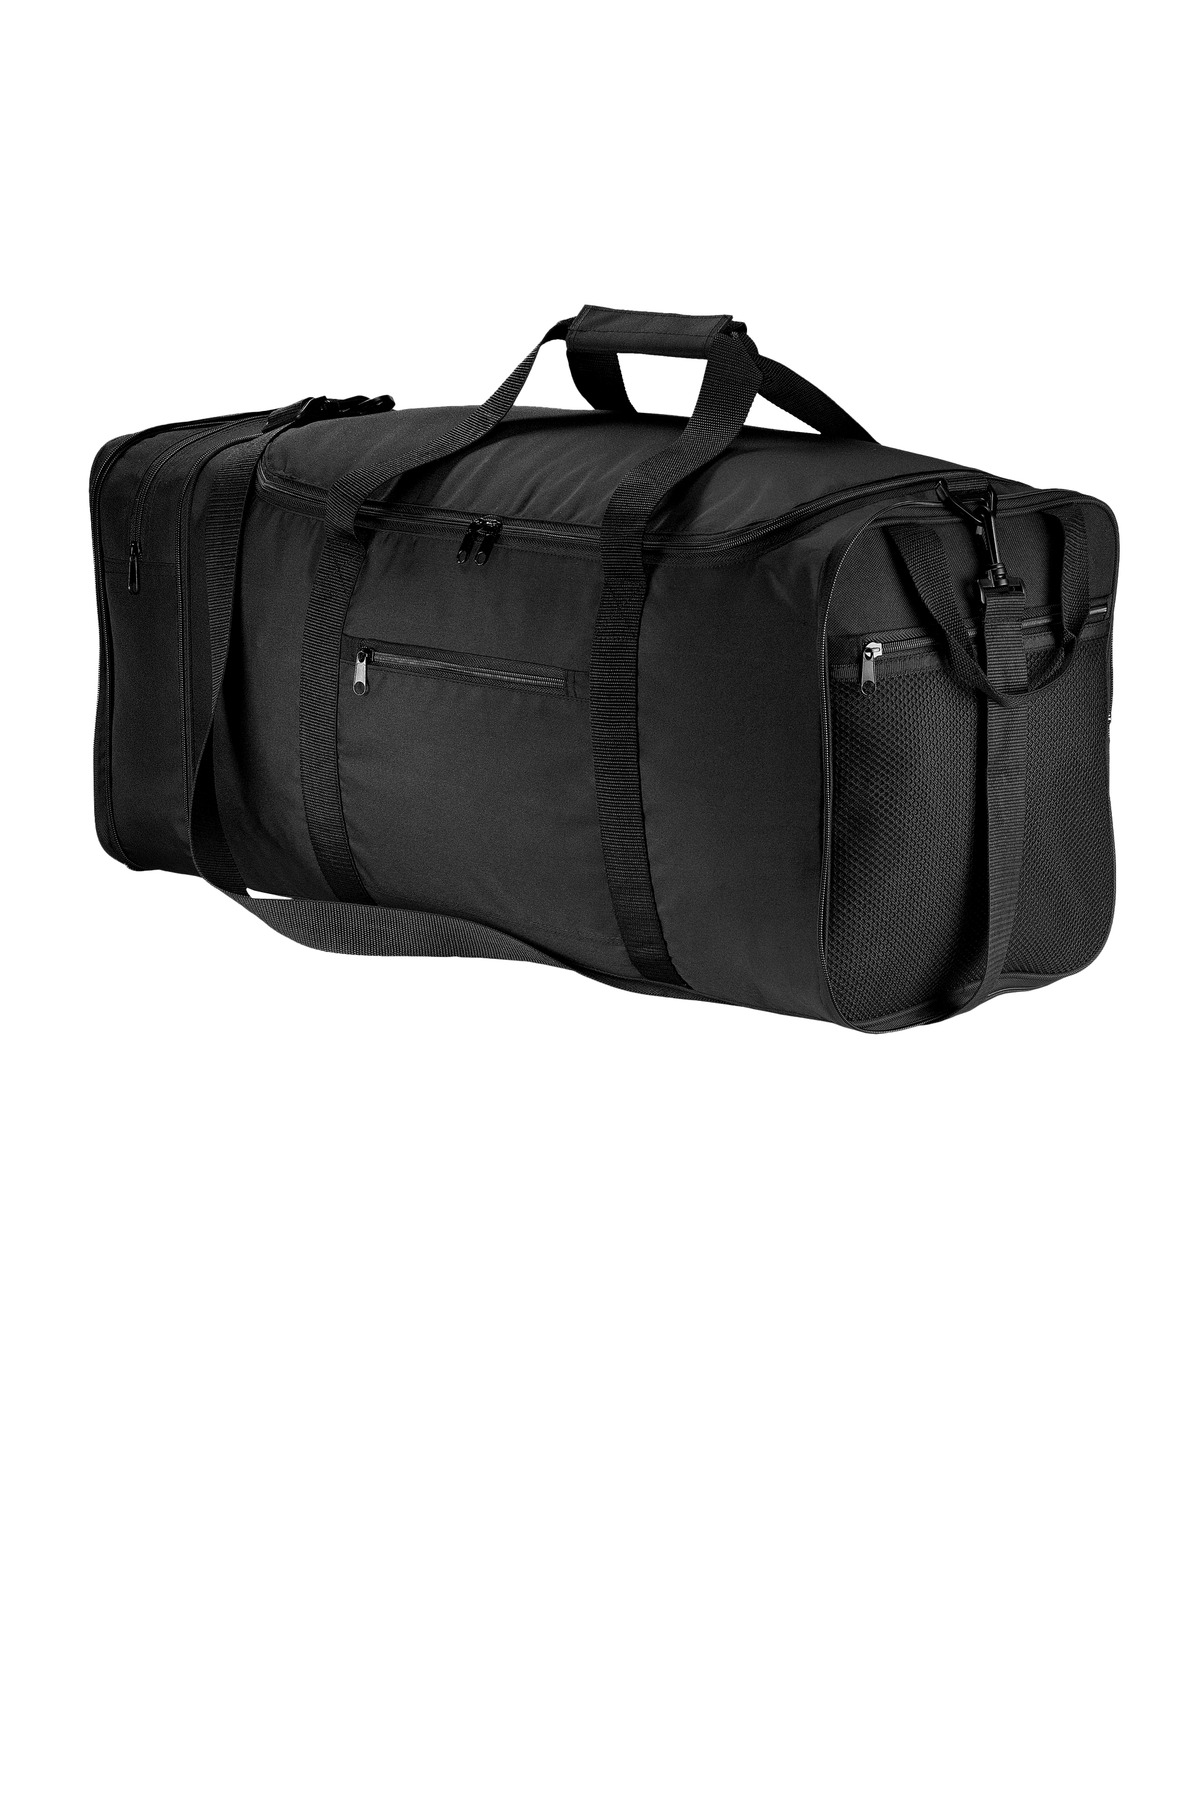 Port Authority Hospitality Bags ® Packable Travel Duffel.-Port Authority